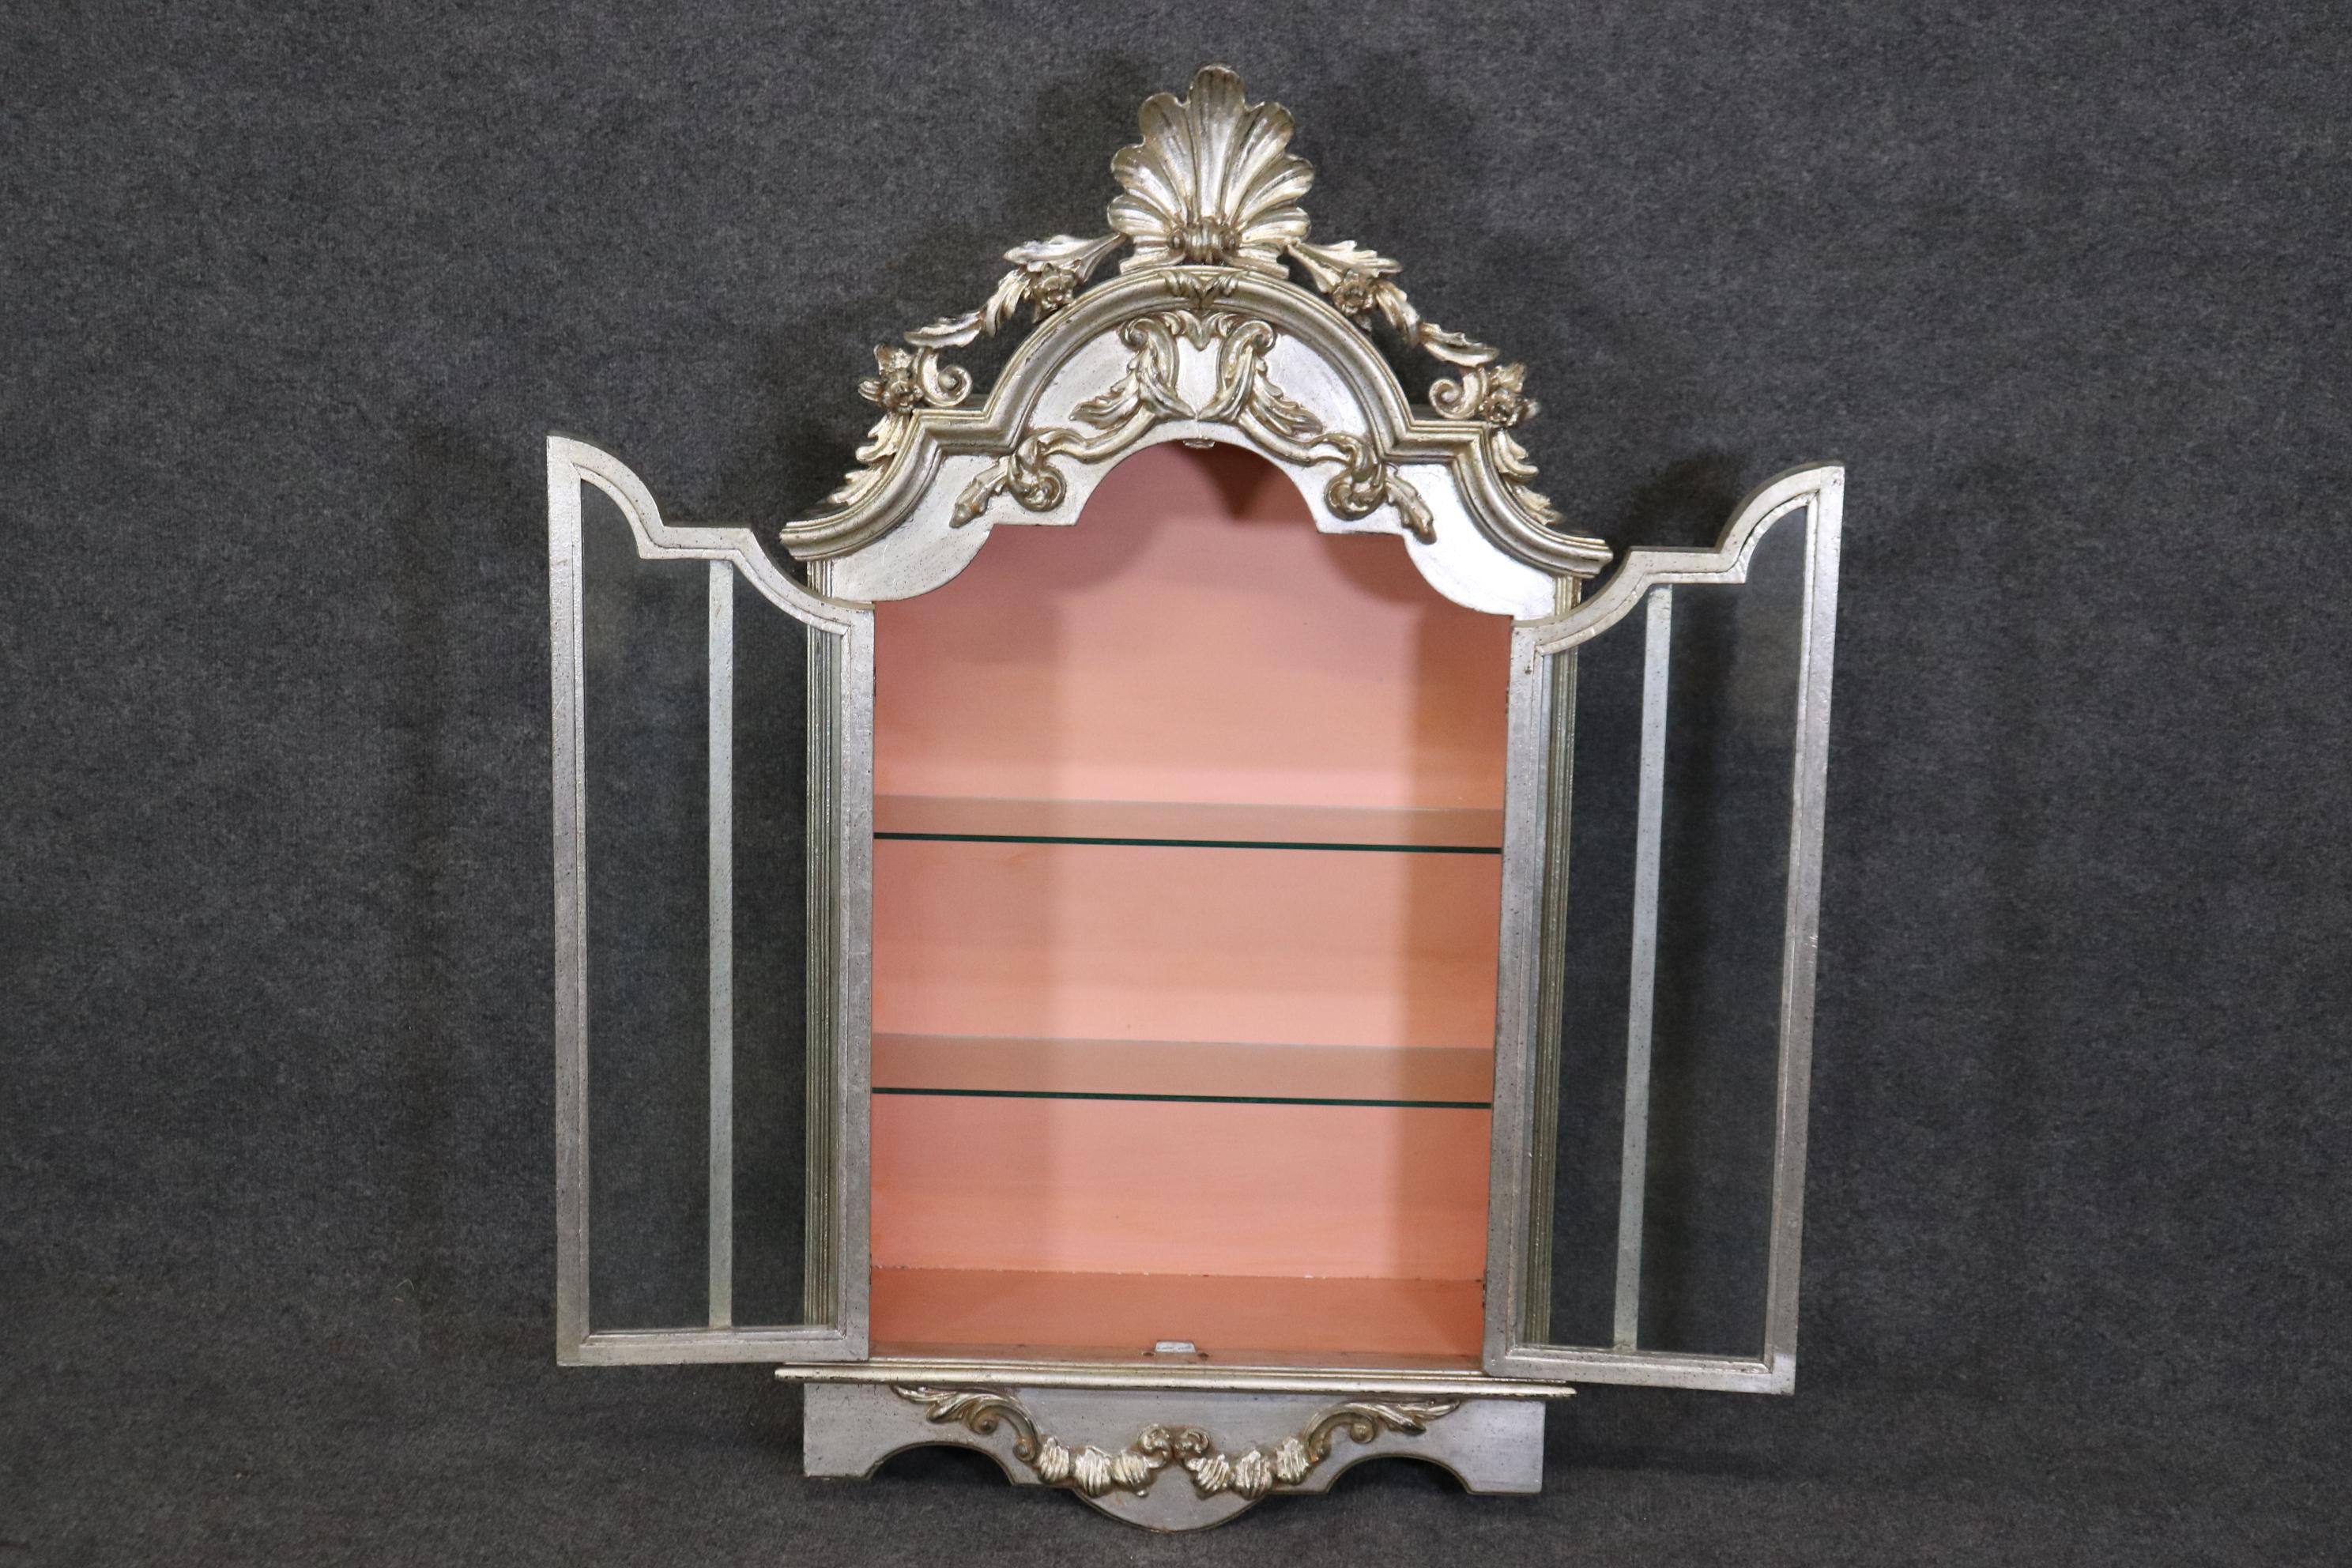 20th Century Italian Rococo Style Silver Gilt Wall Hanging Etagere Shelf by Labarge